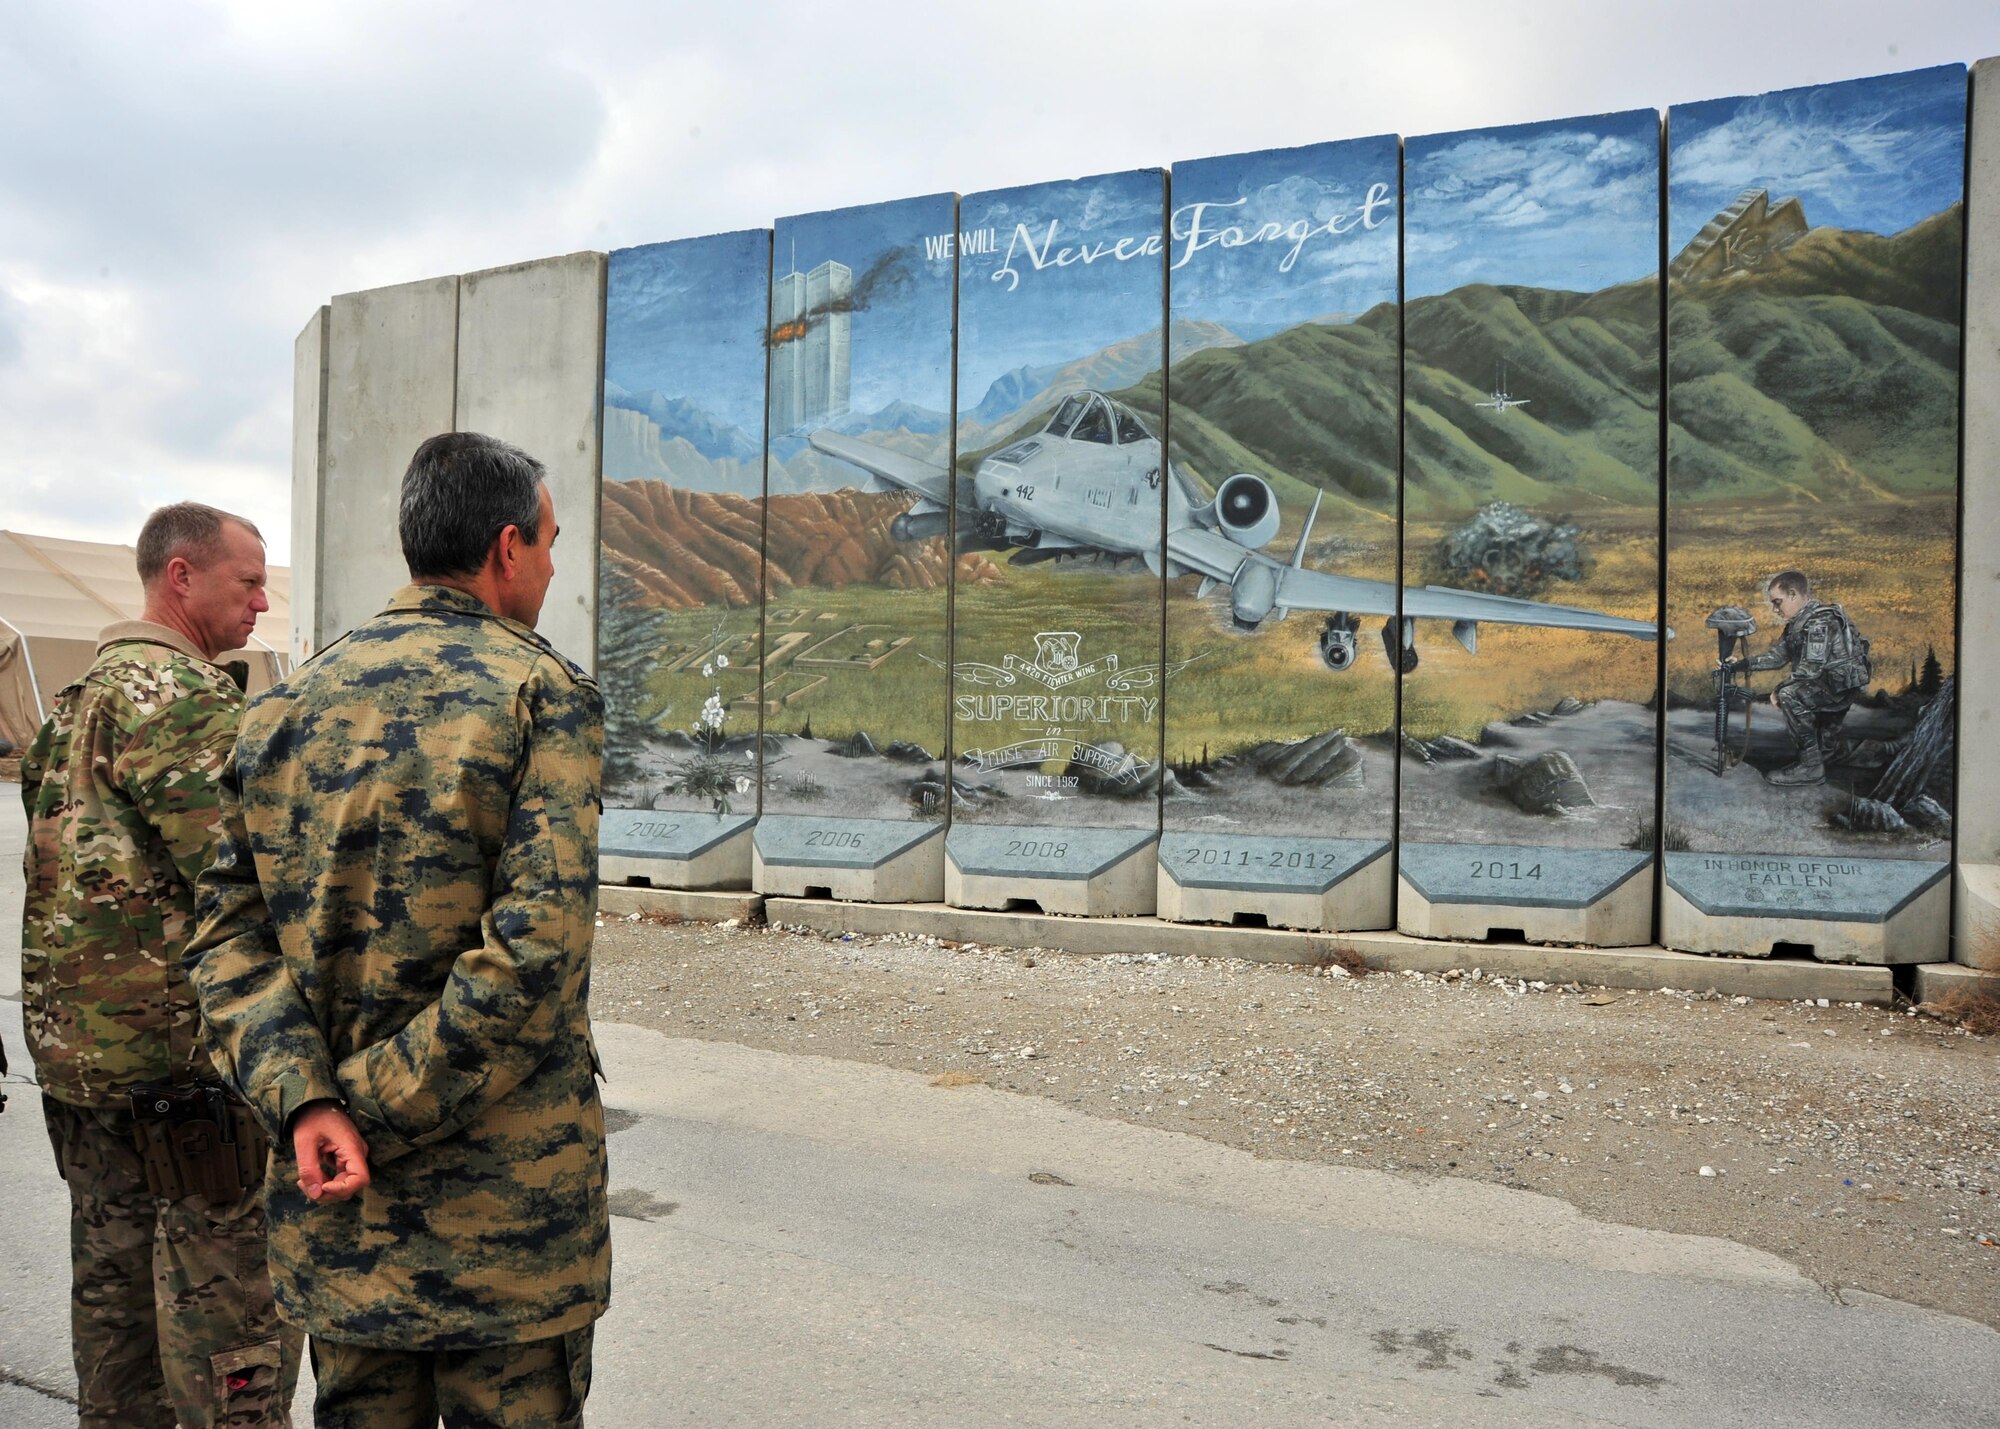 U.S. Air Force Brig. Gen. Mark Kelly, 455th Air Expeditionary Wing commander, and Air Force Maj. Gen.  Mehmet Cahit Bakir, Commander of Kabul International Airport, admire a mural during a tour Jan. 22, 2015 at Bagram Airfield, Afghanistan. During the tour, Bakir had the opportunity to meet with 455th Air Expeditionary Wing leadership and become better acquainted with Air Force assets and squadrons here. (U.S. Air Force photo by Staff Sgt. Whitney Amstutz/released)